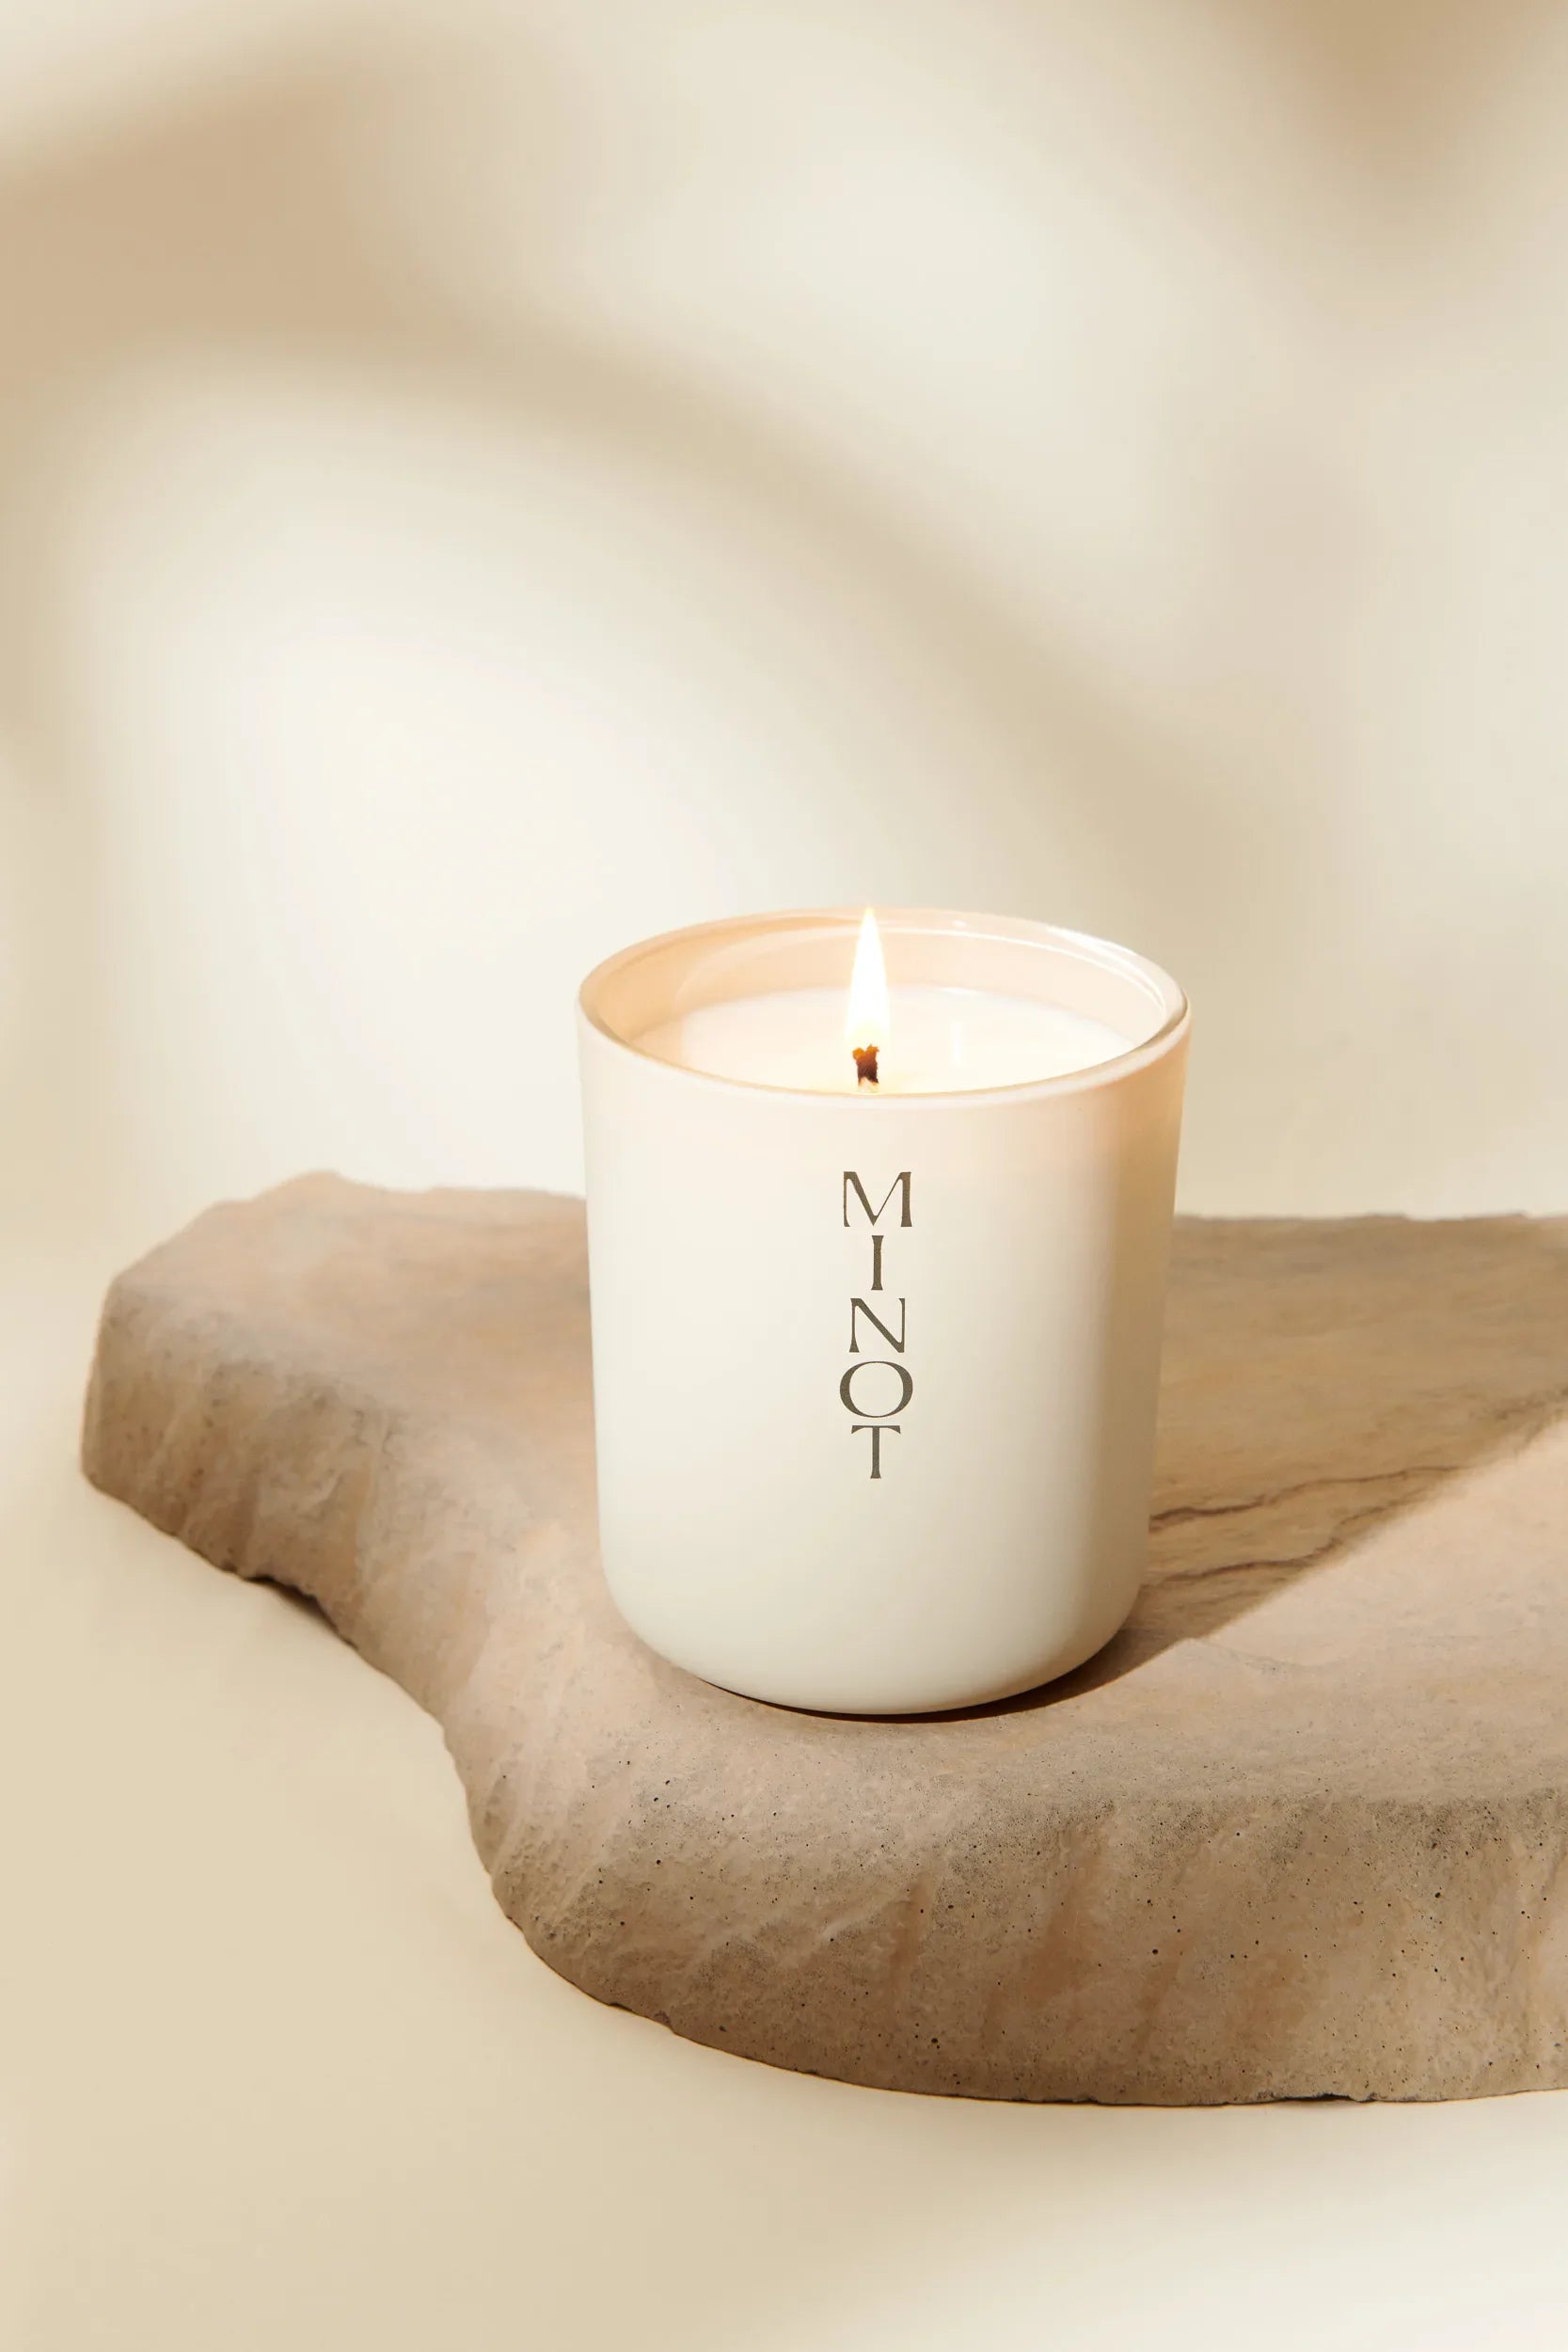 Cliffwalk is a sustainable candle made of soy wax and sandalwood, patchouli and jasmine scents